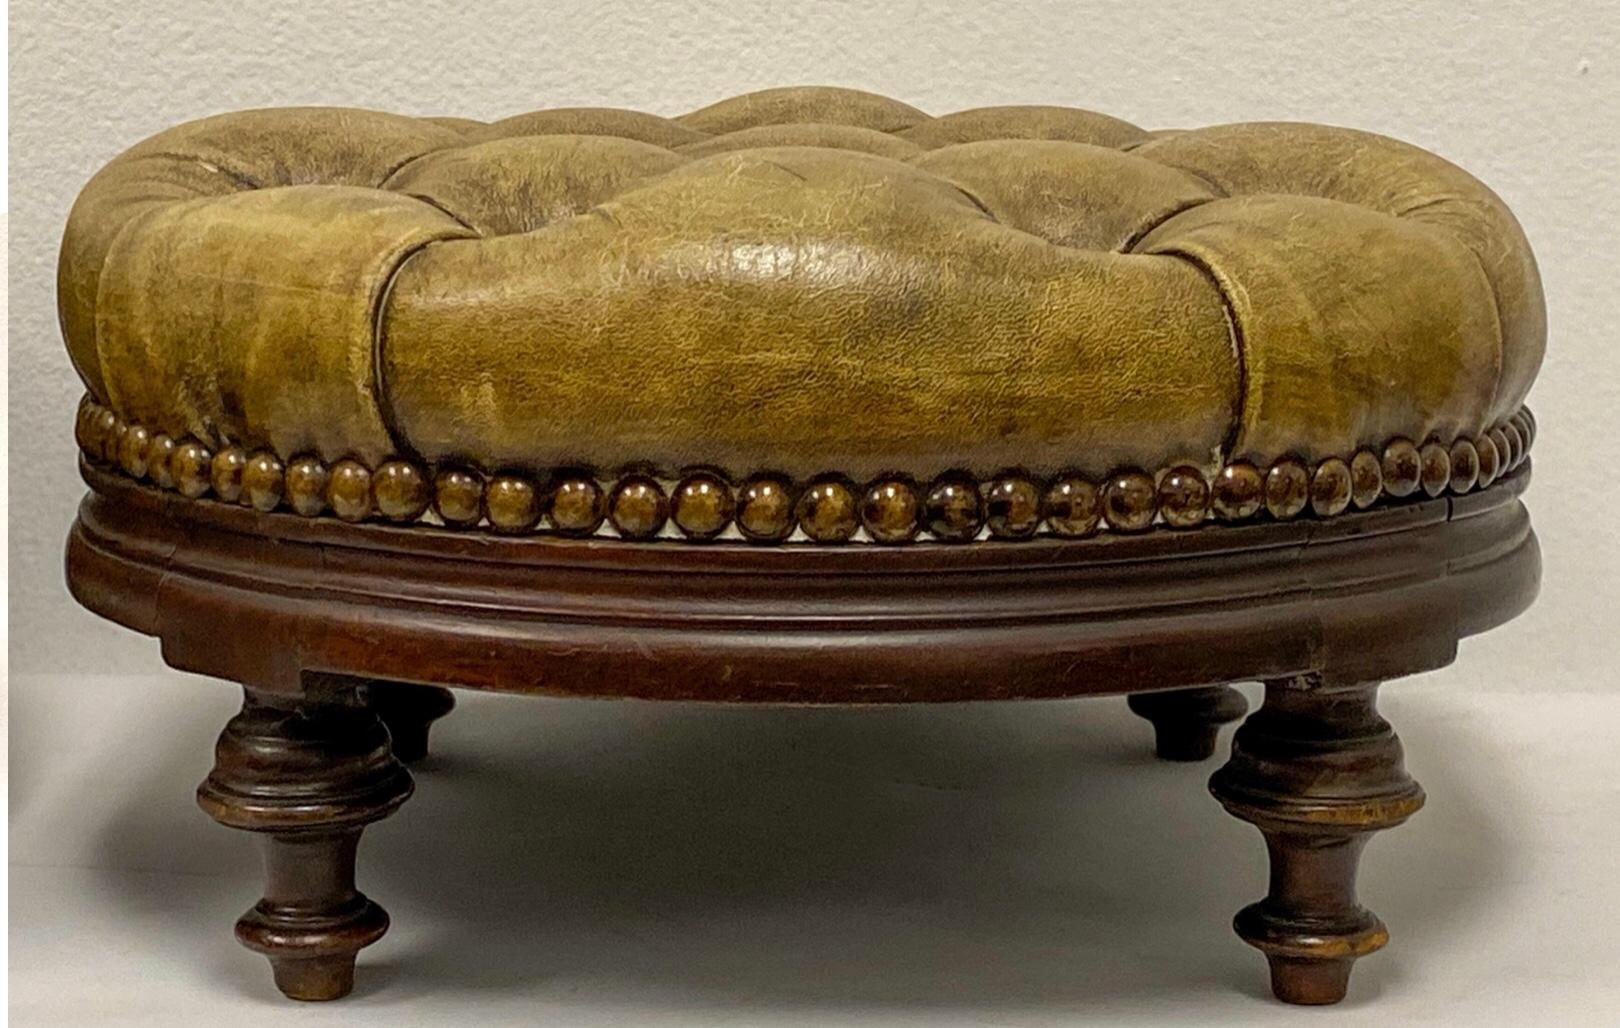 Early English Tufted Gold Leather Chesterfield Ottomans, a Pair In Good Condition For Sale In Kennesaw, GA